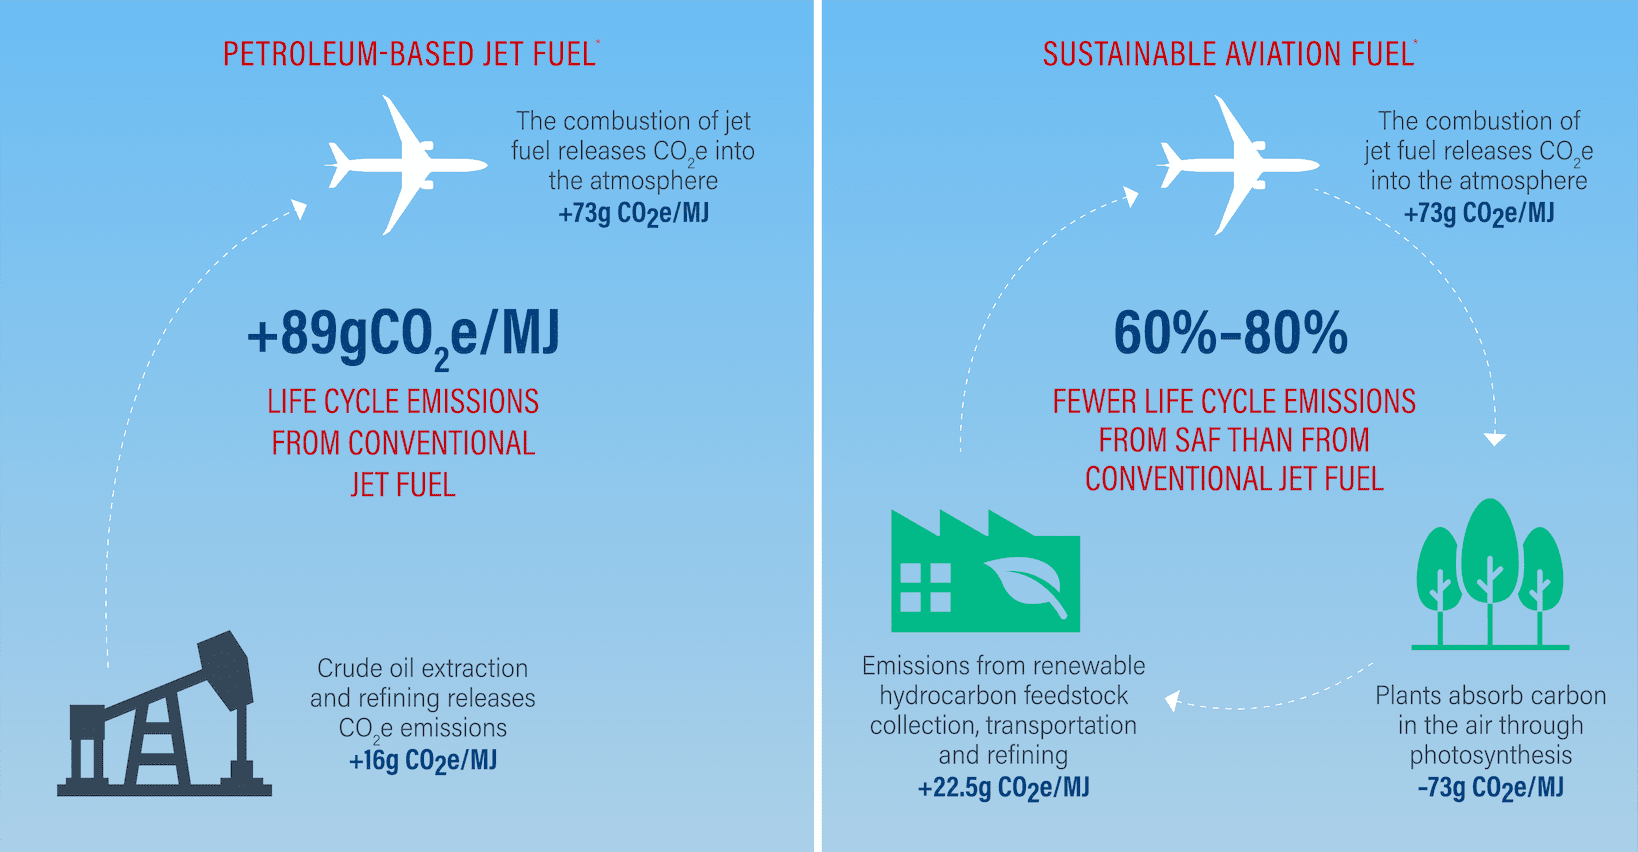 Graphic showing the lifecycle emissions difference between conventional jet fuel (+89g CO2e/MJ) and sustainable aviation fuel (60-80% fewer life cycle emissions)